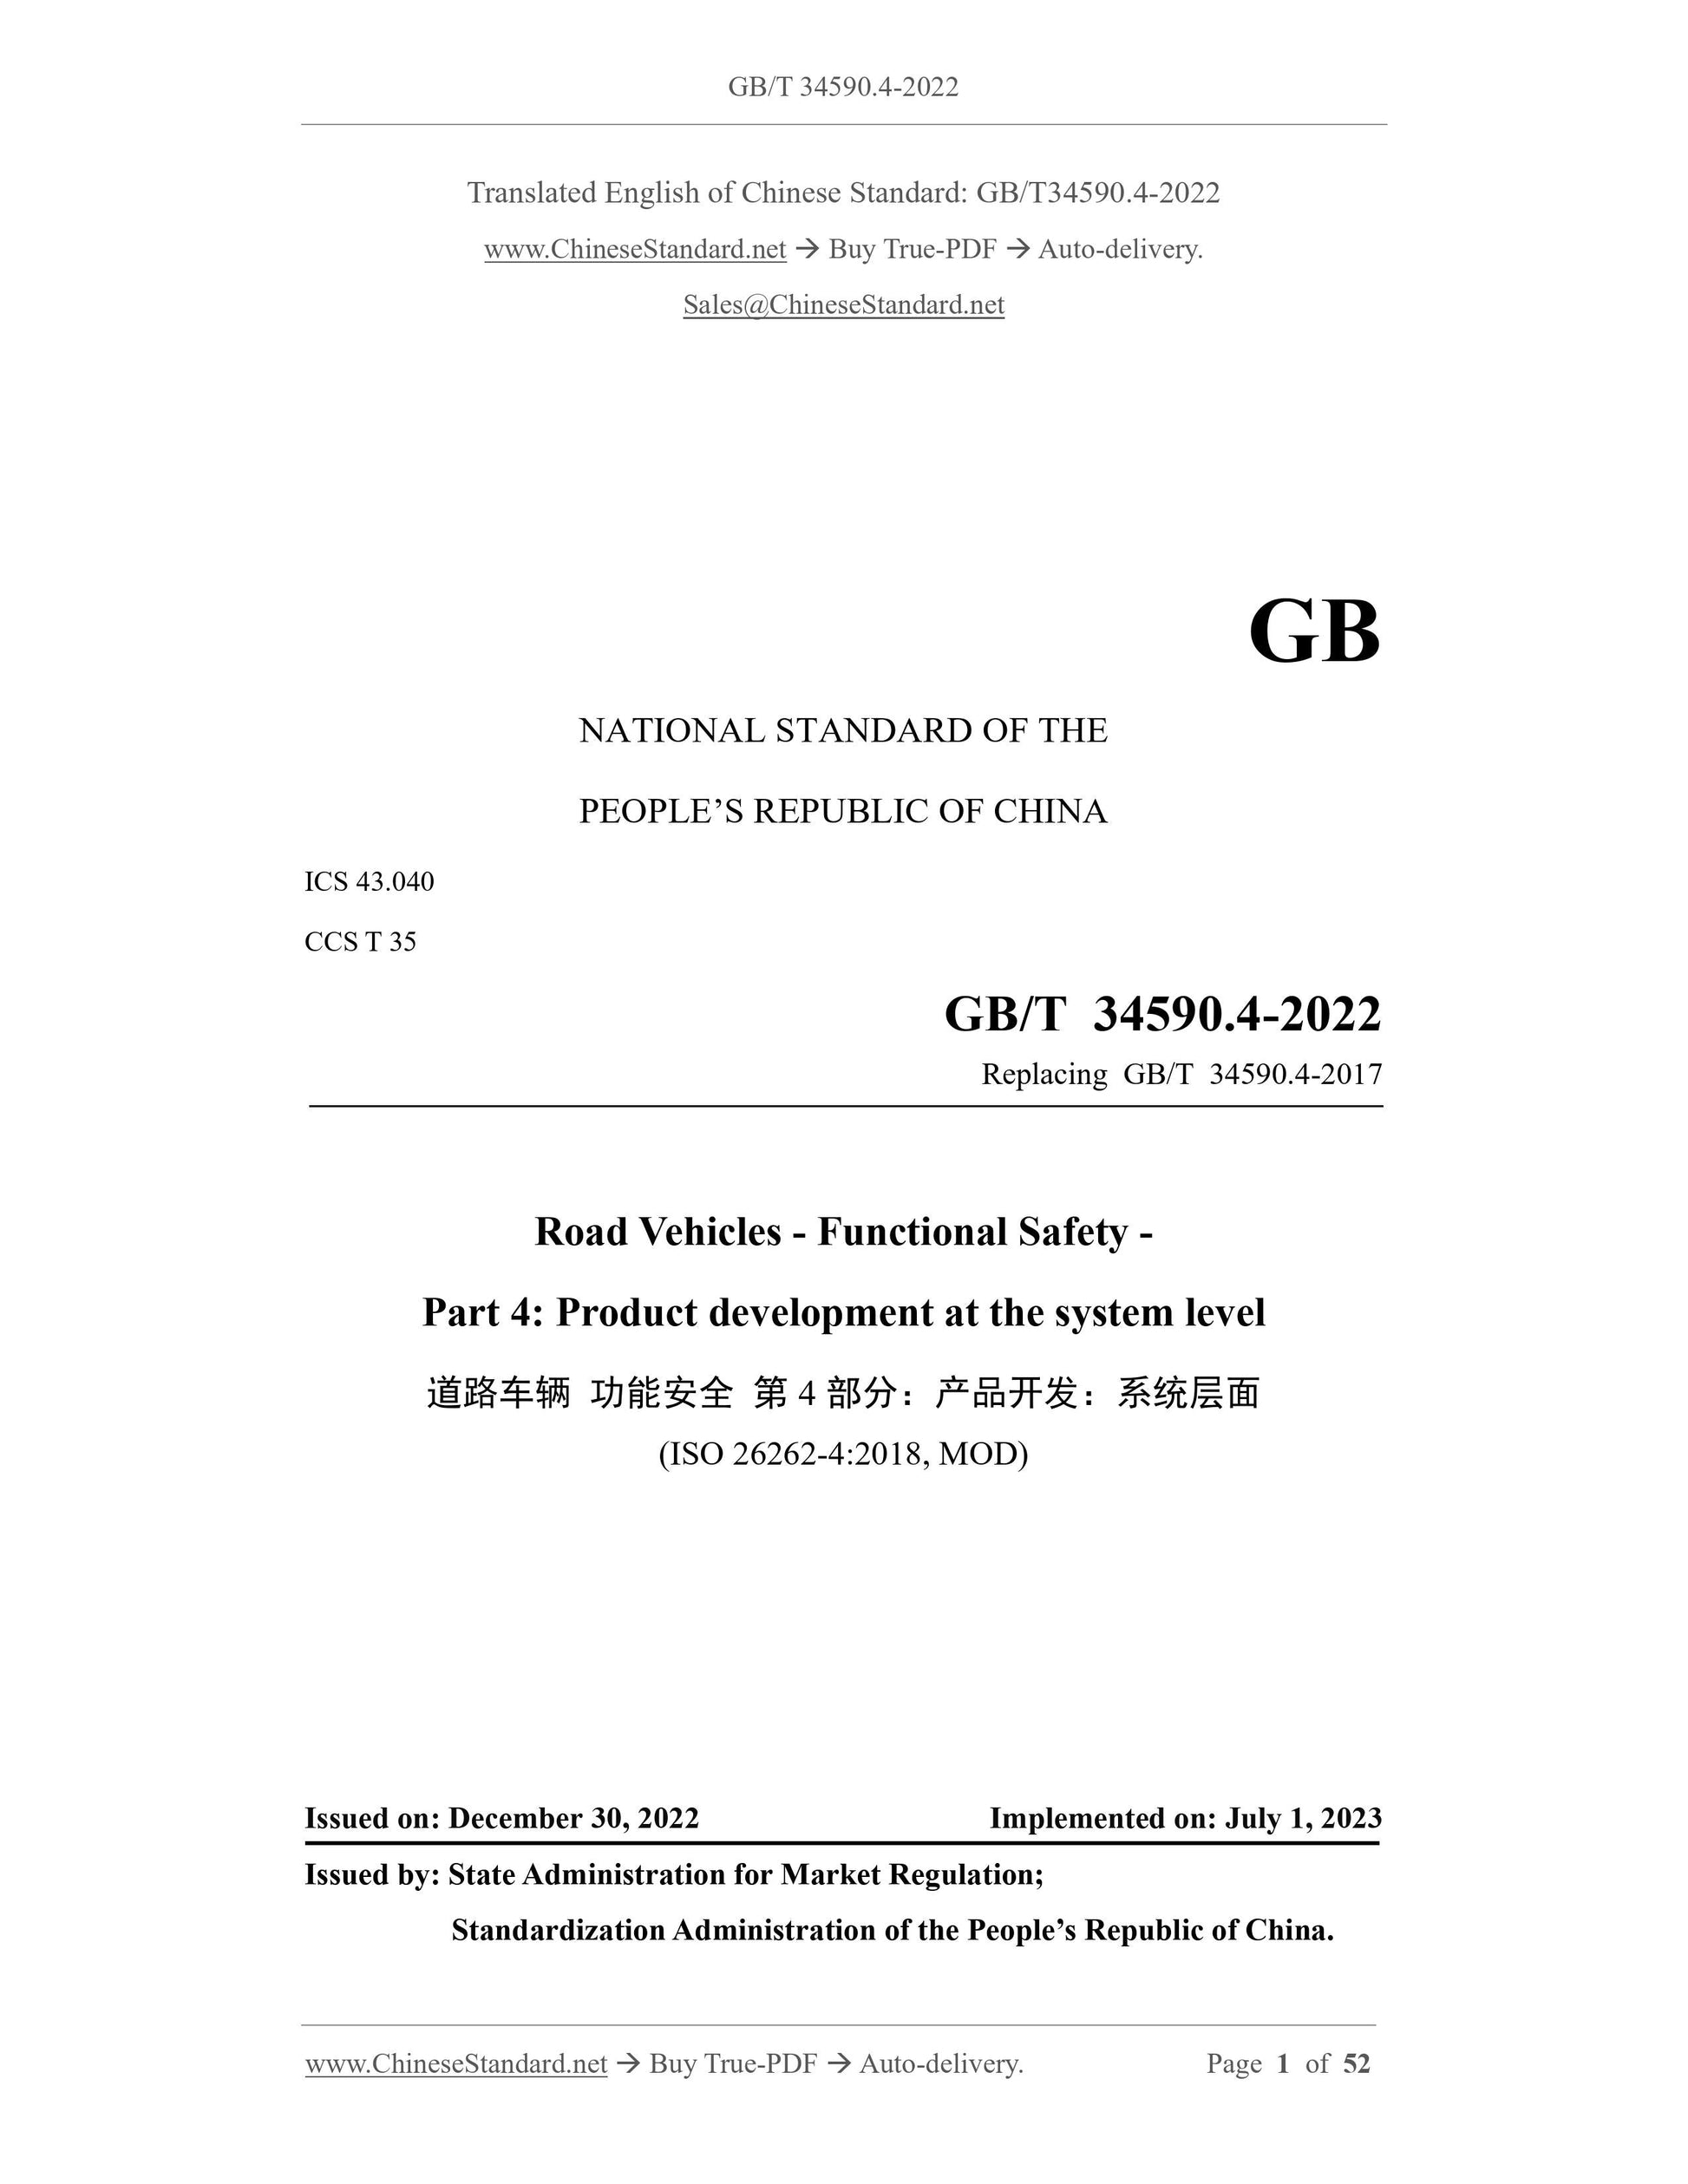 GB/T 34590.4-2022 Page 1